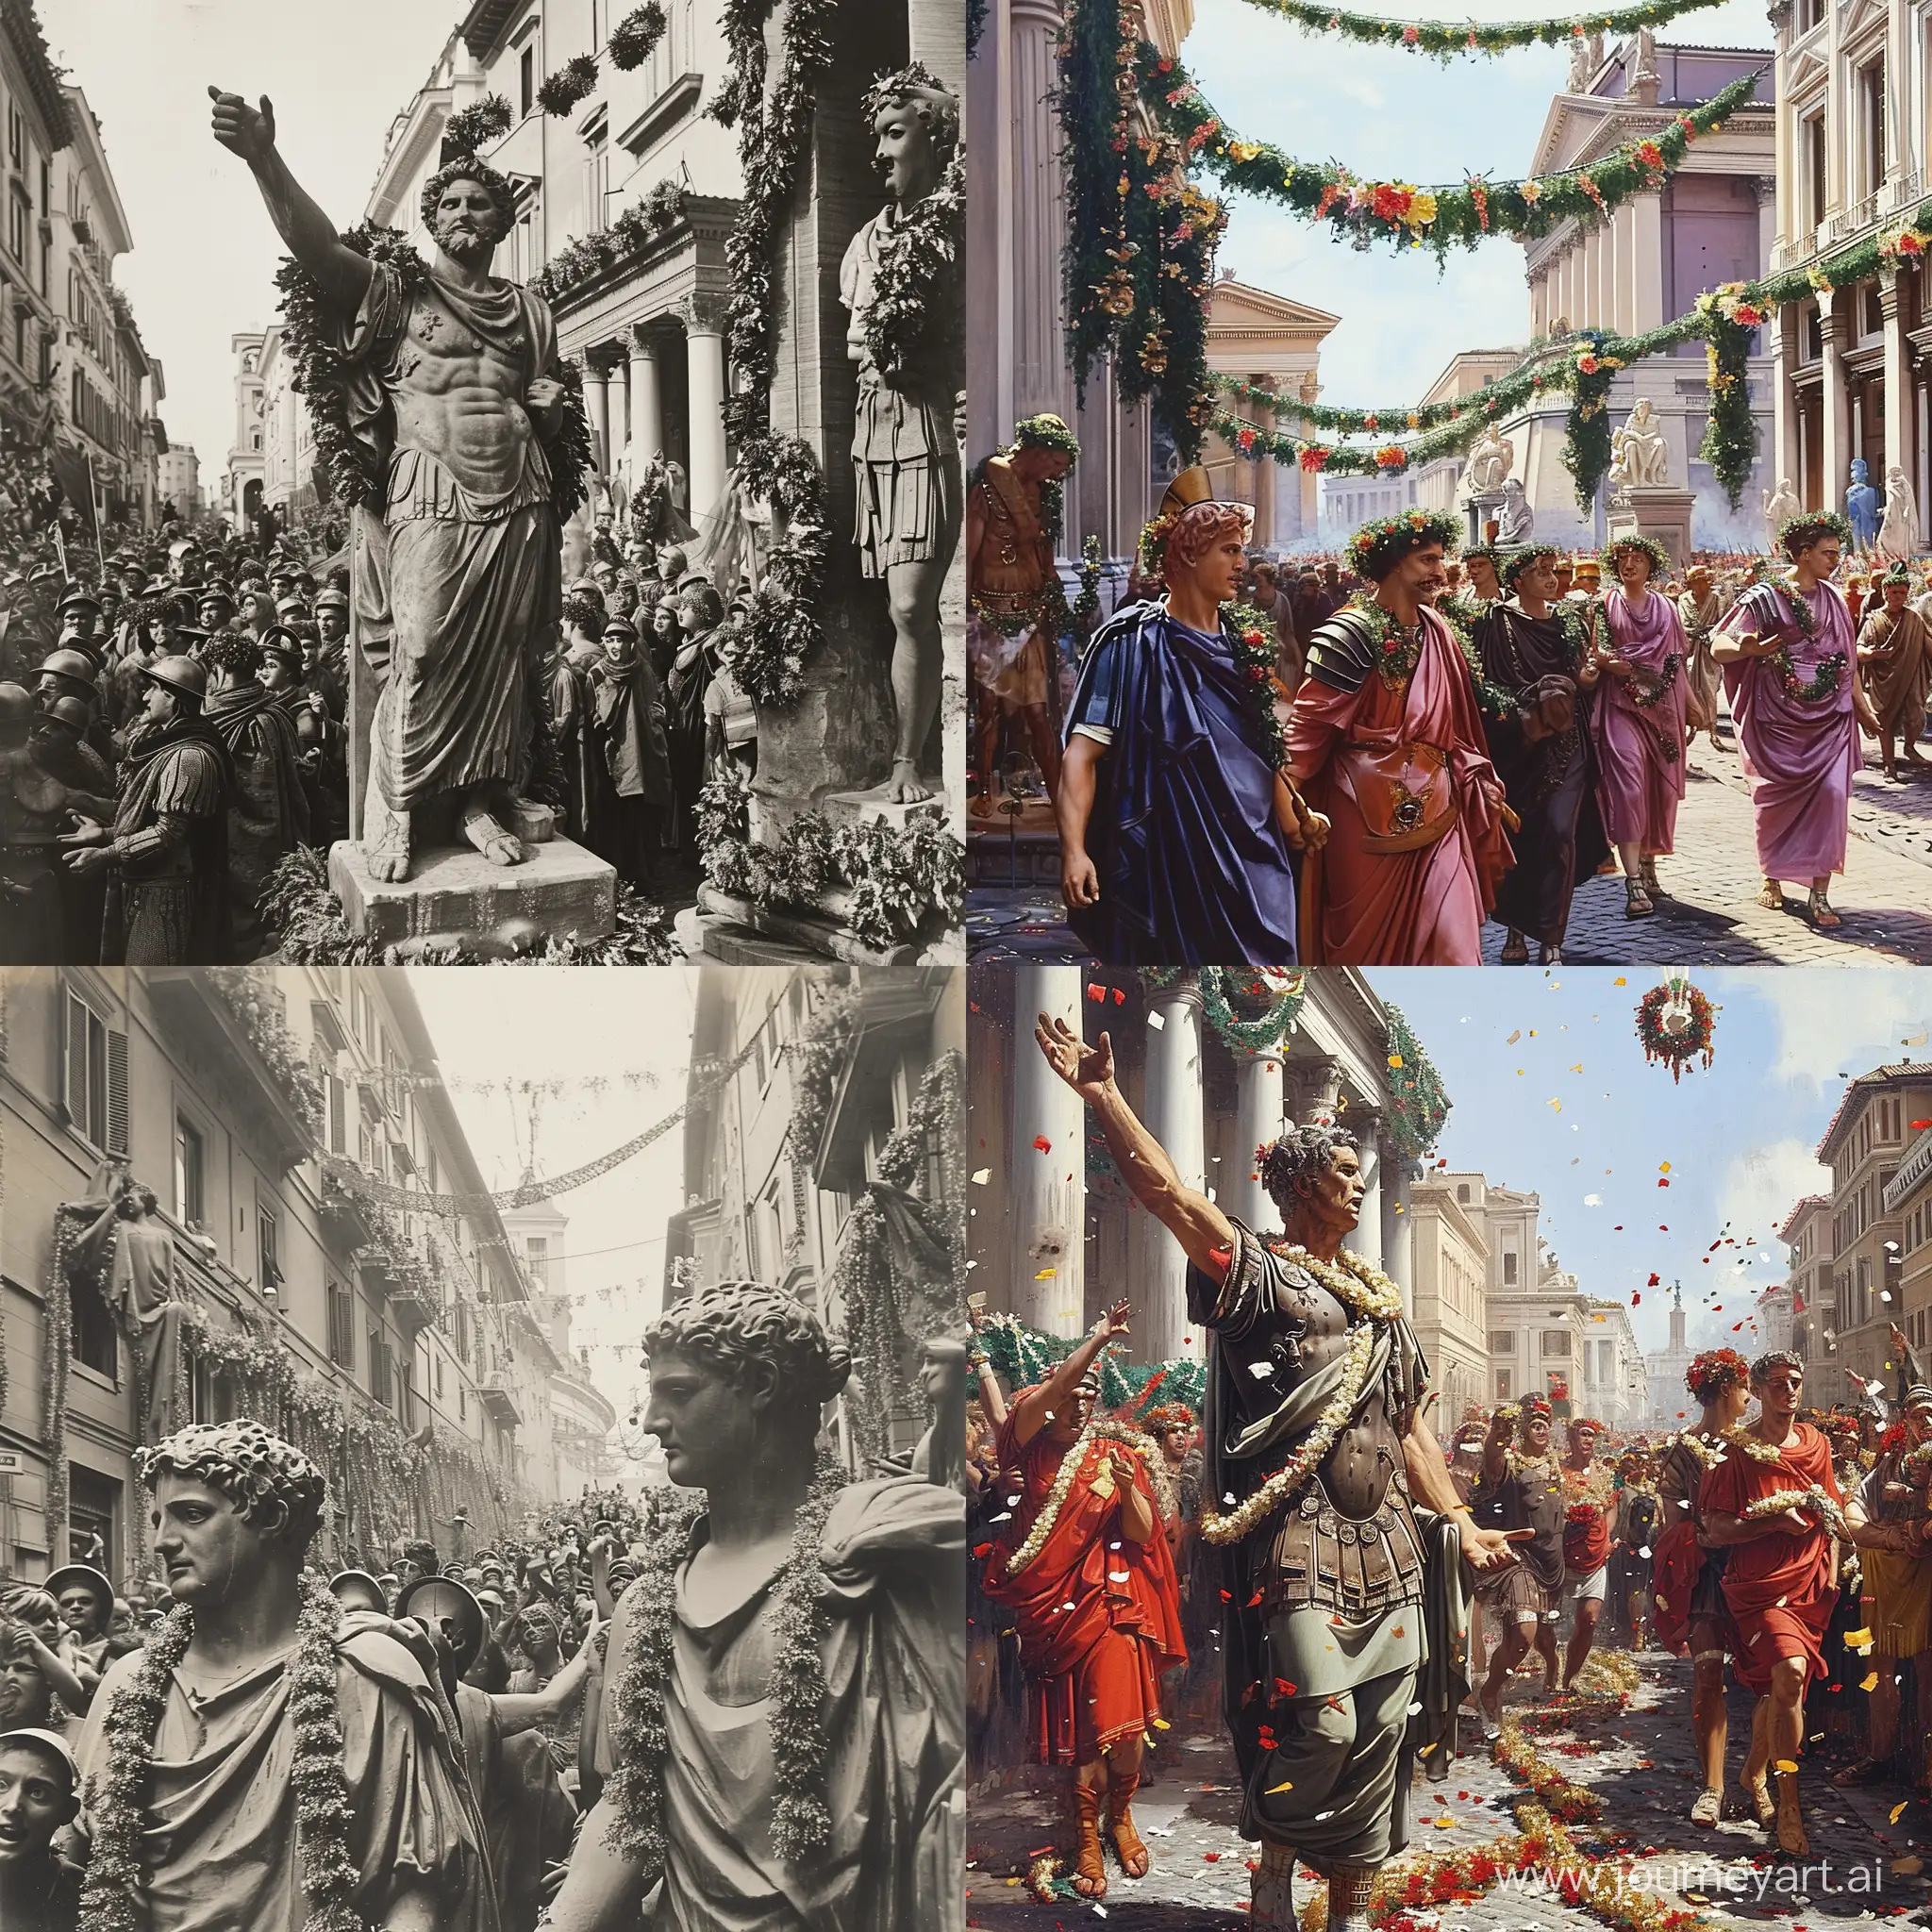 Caesars-Victory-Celebration-in-the-Streets-of-Rome